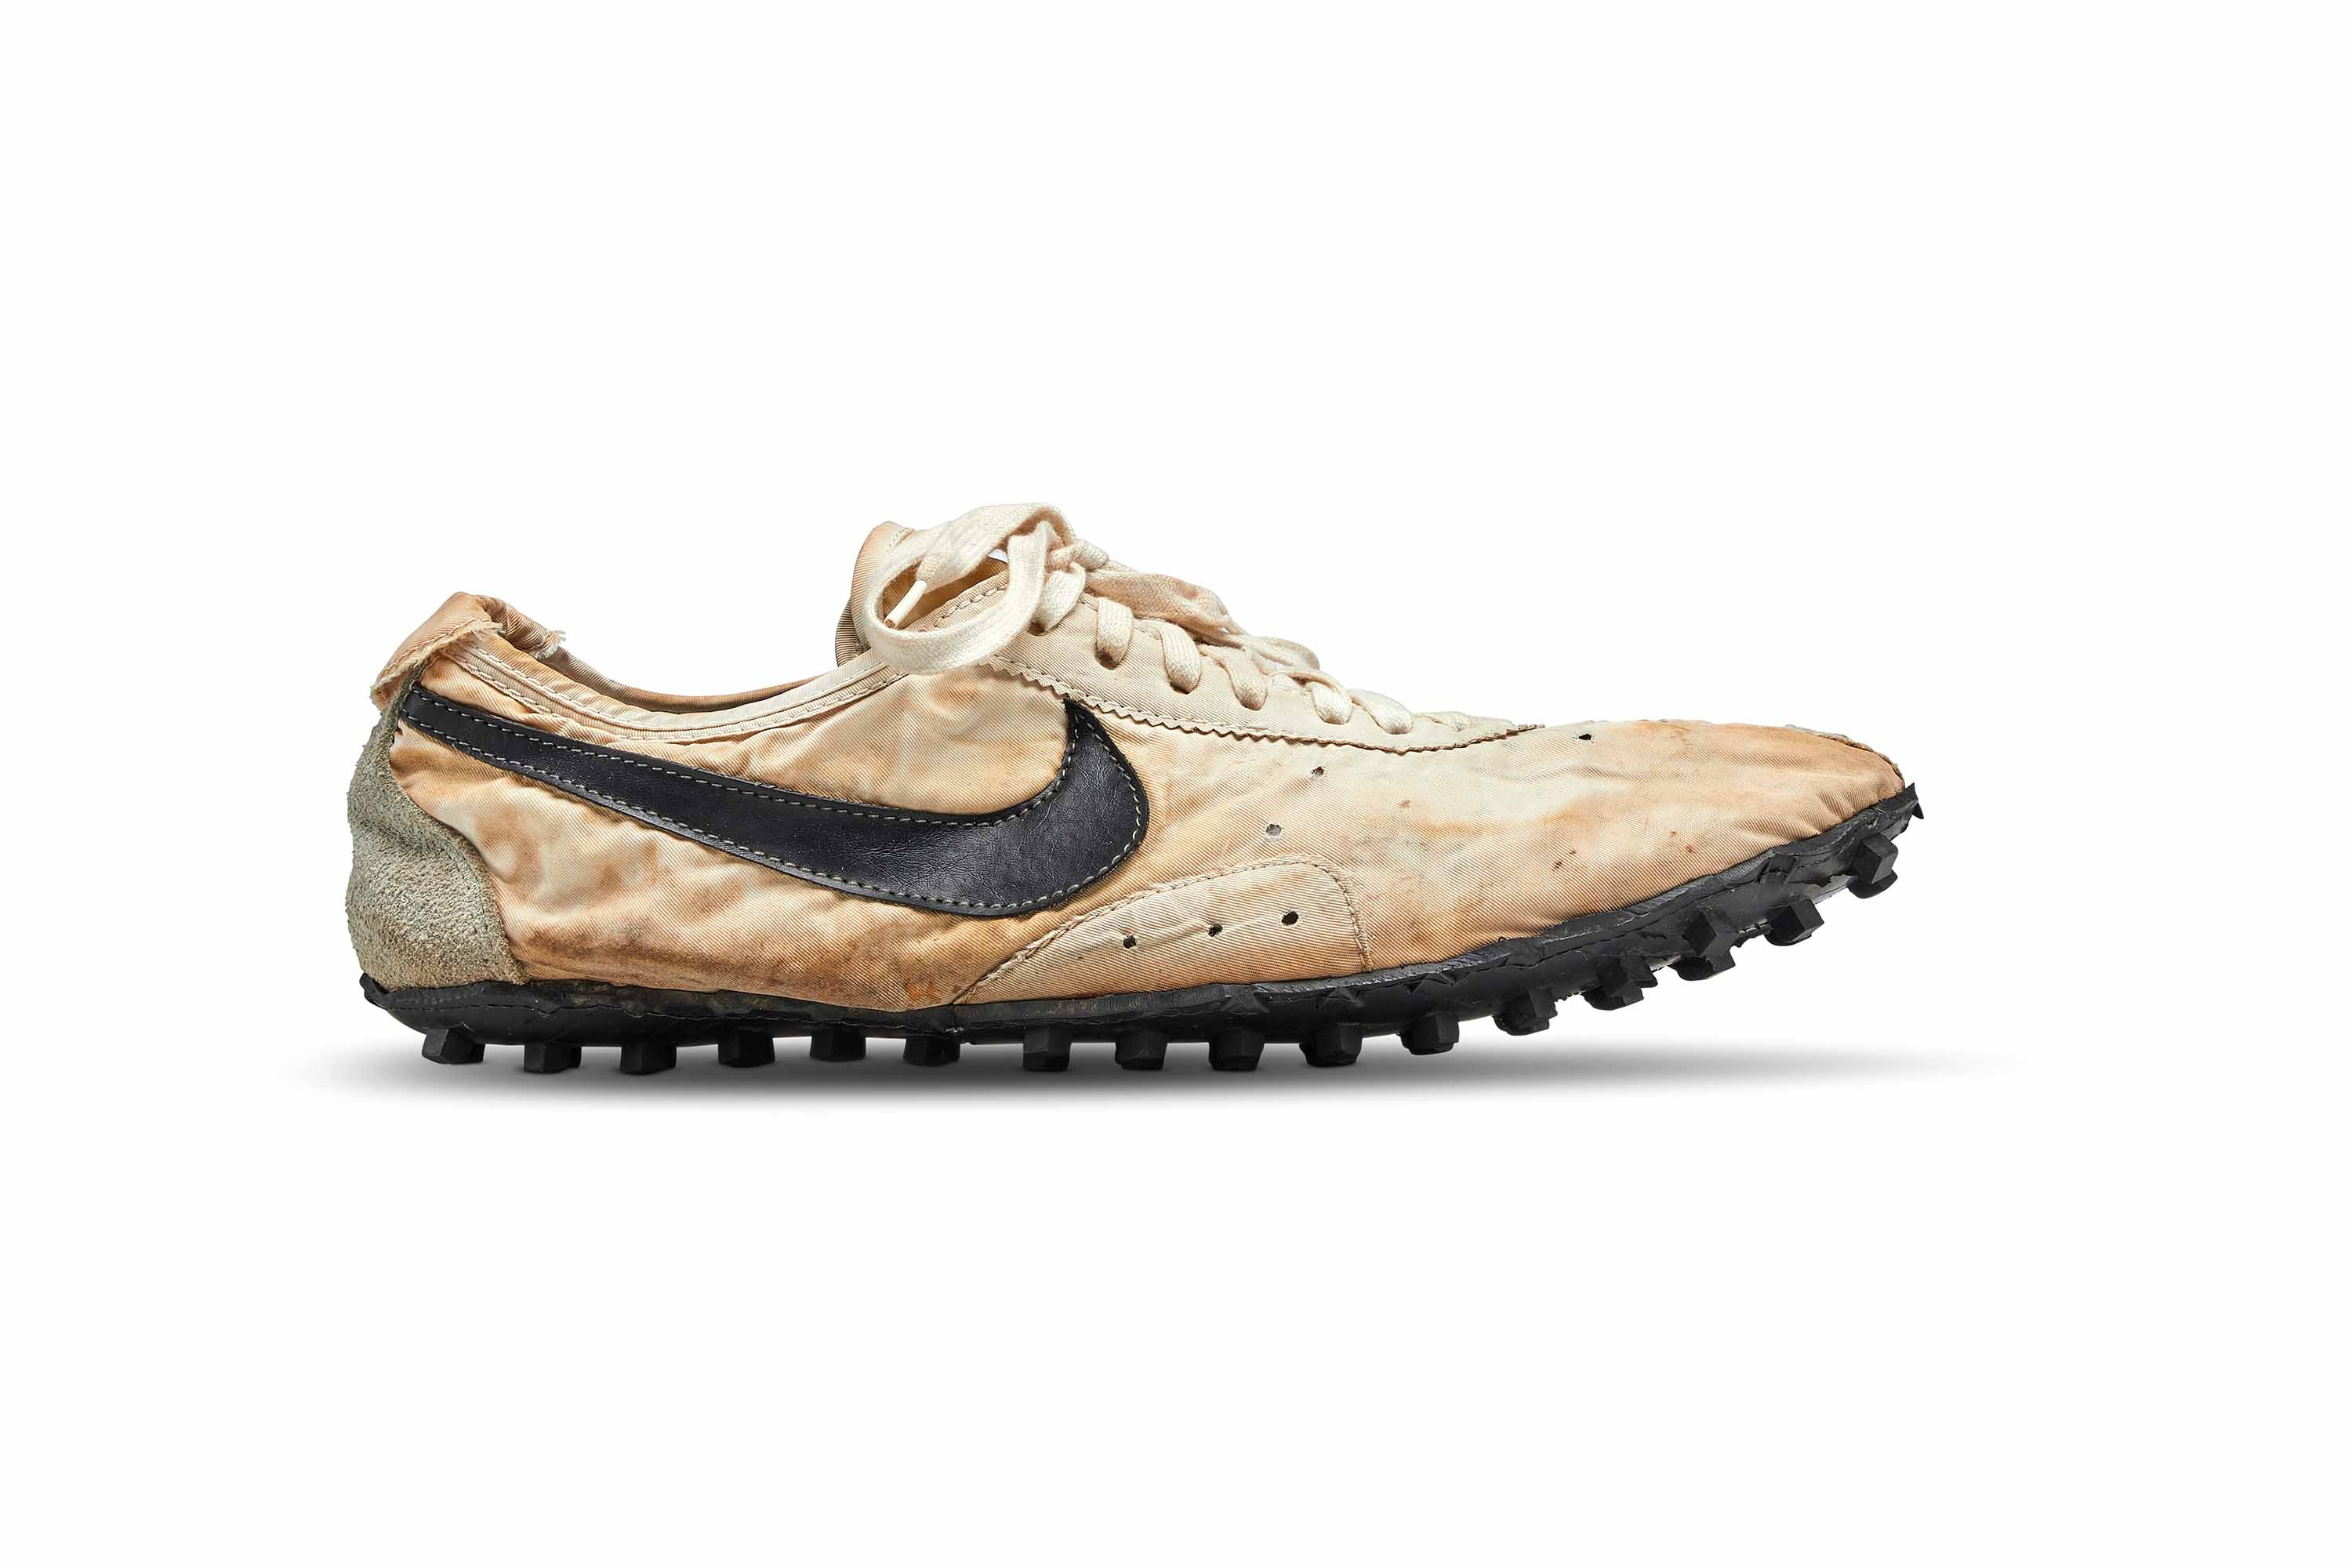 Nike's rare 'Moon Shoe' sold for $437,500, shattering the auction record for sneakers |